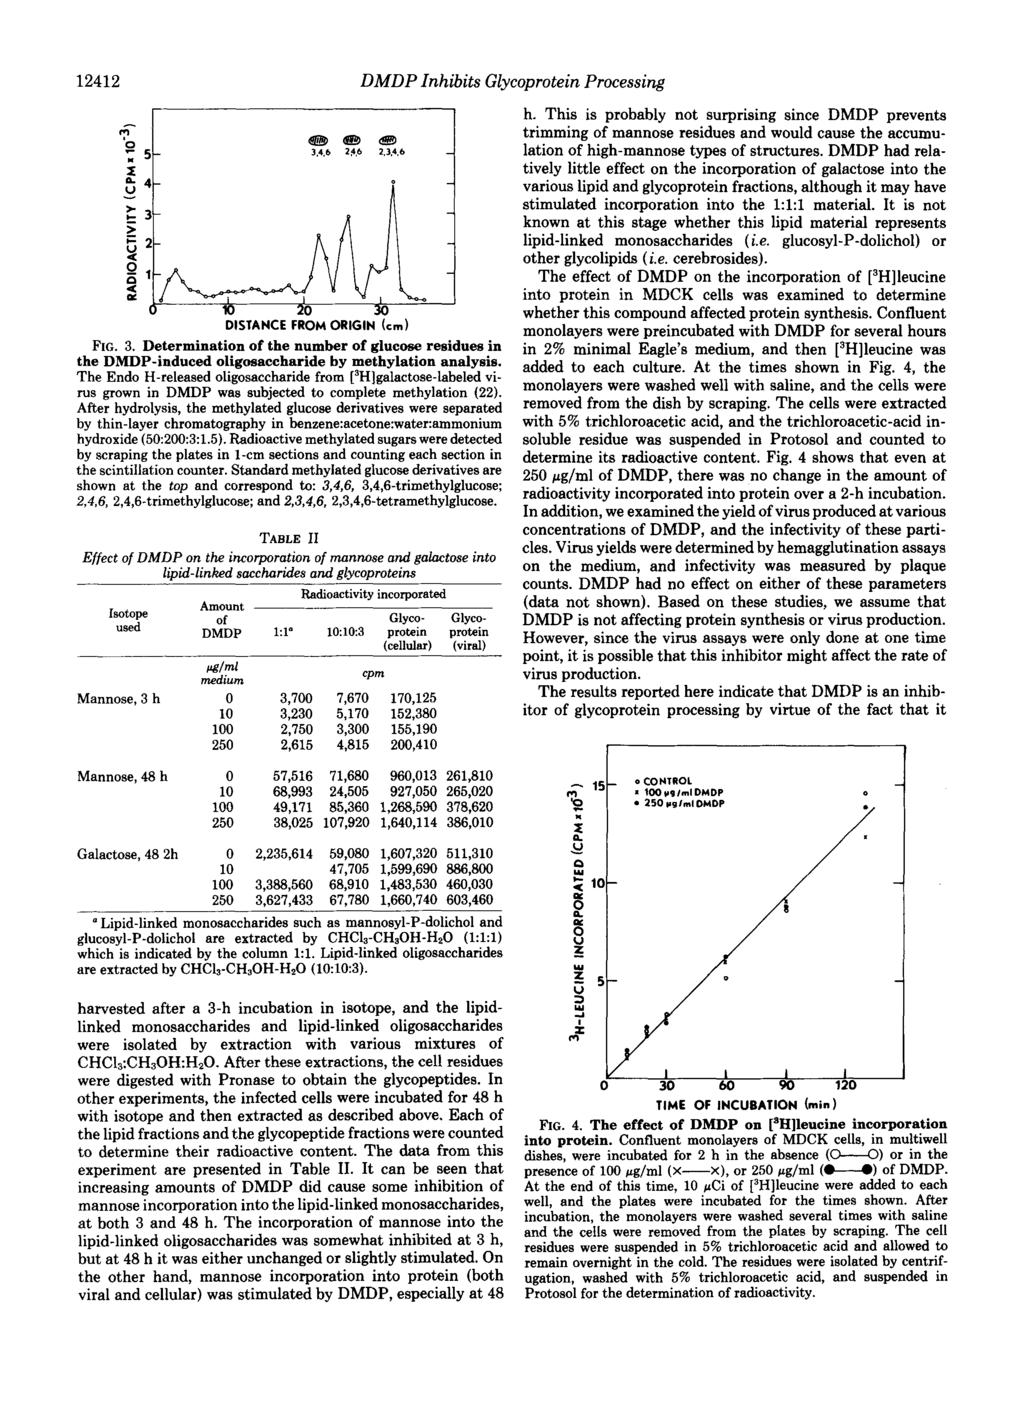 12412 DMDP Inhibits Glycoprotein Processing DISTANCE FROM ORIGIN (cm) FIG. 3. Determination of the number of glucose residues in the DMDP-induced oligosaccharide by methylation analysis.